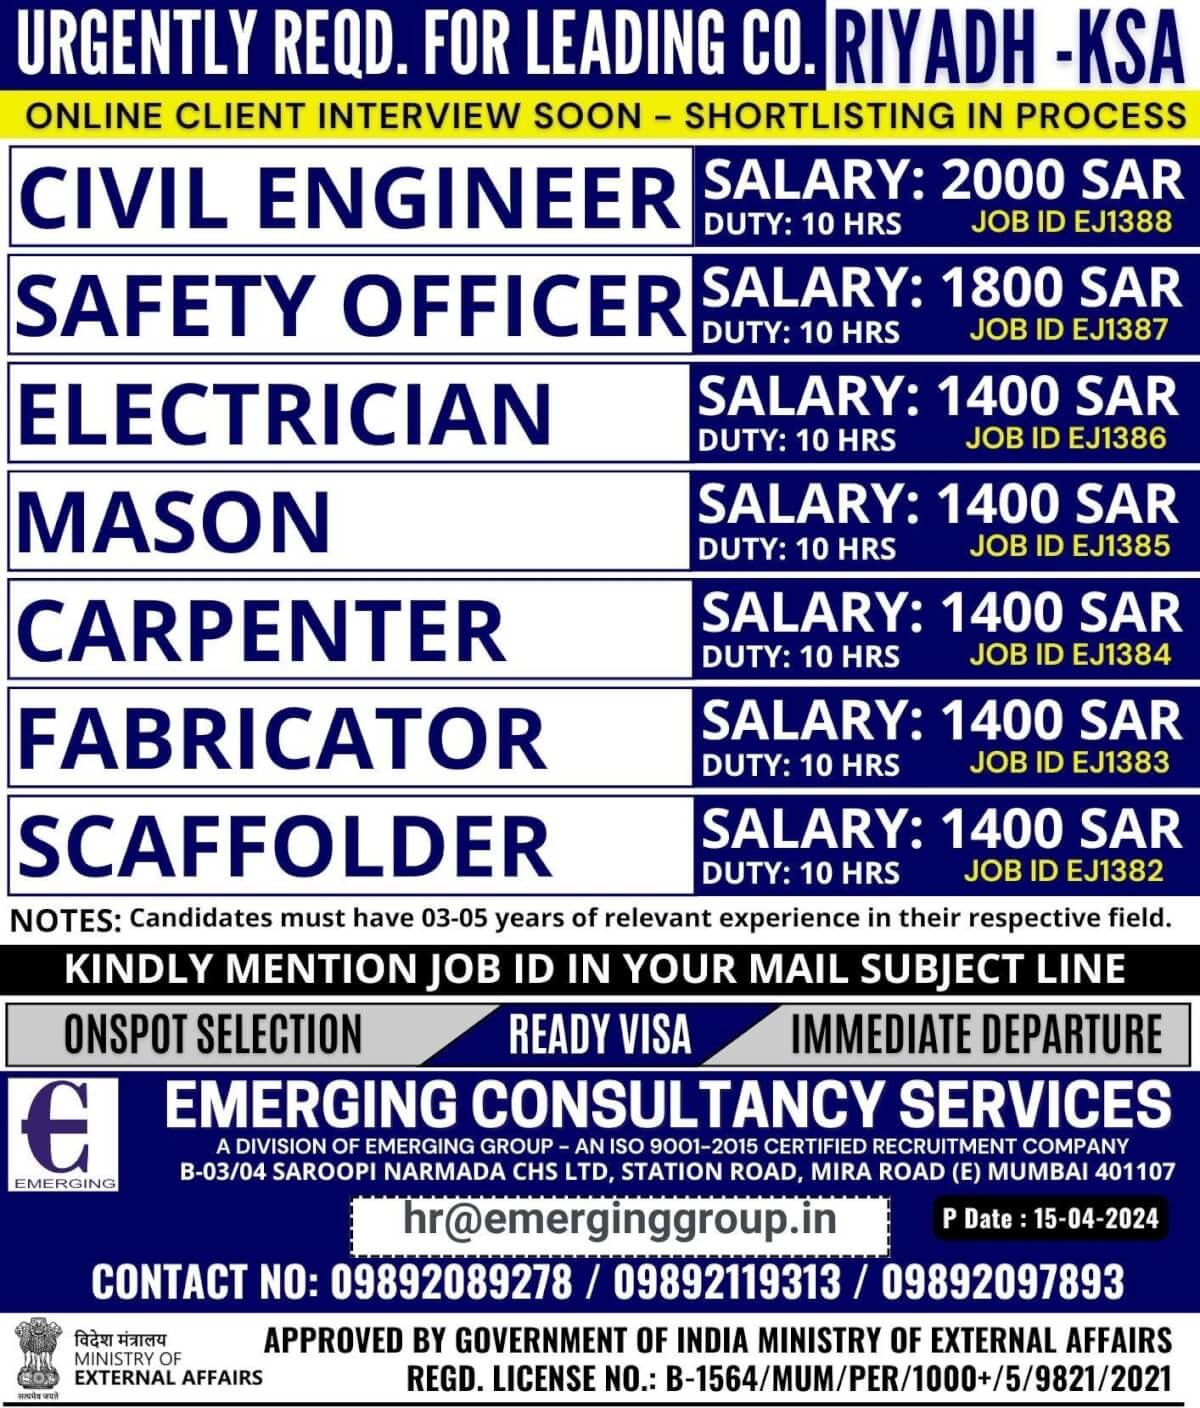 URGENTLY REQUIRED FOR LEADING COMPANY IN SAUDI ARABIA.